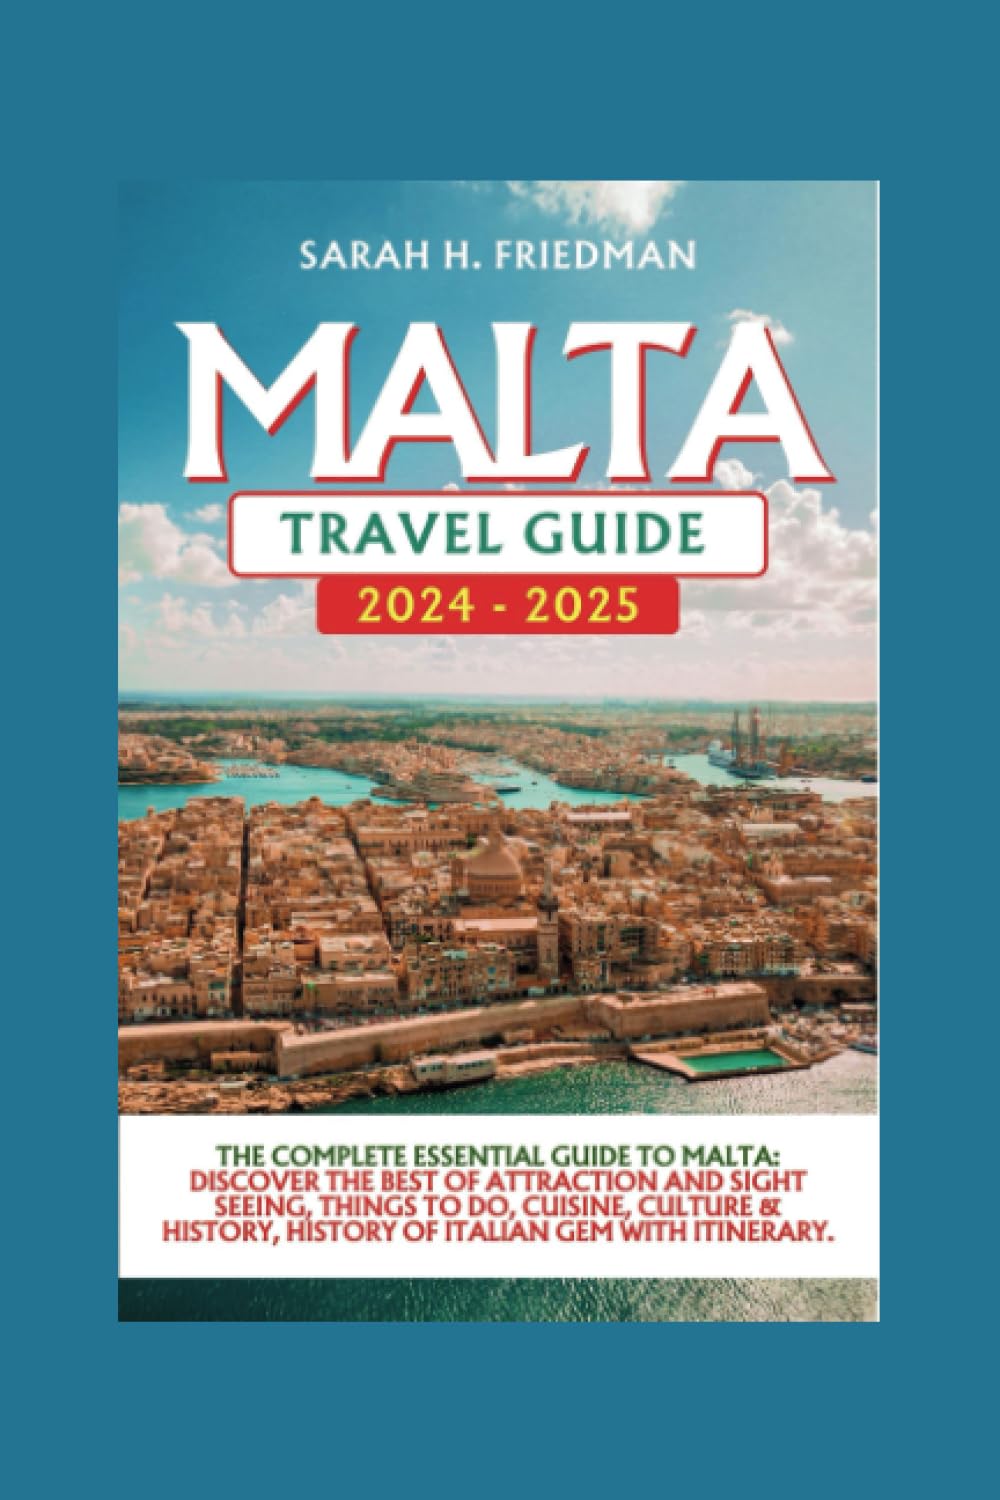 Malta Travel Guide 2024-2025: The Complete Essential Guide To Malta: Discover The Best Of Attraction And Sight Seeing, Things To Do, Cuisine, Culture & History, History Of Italian Gem With Itinerary.